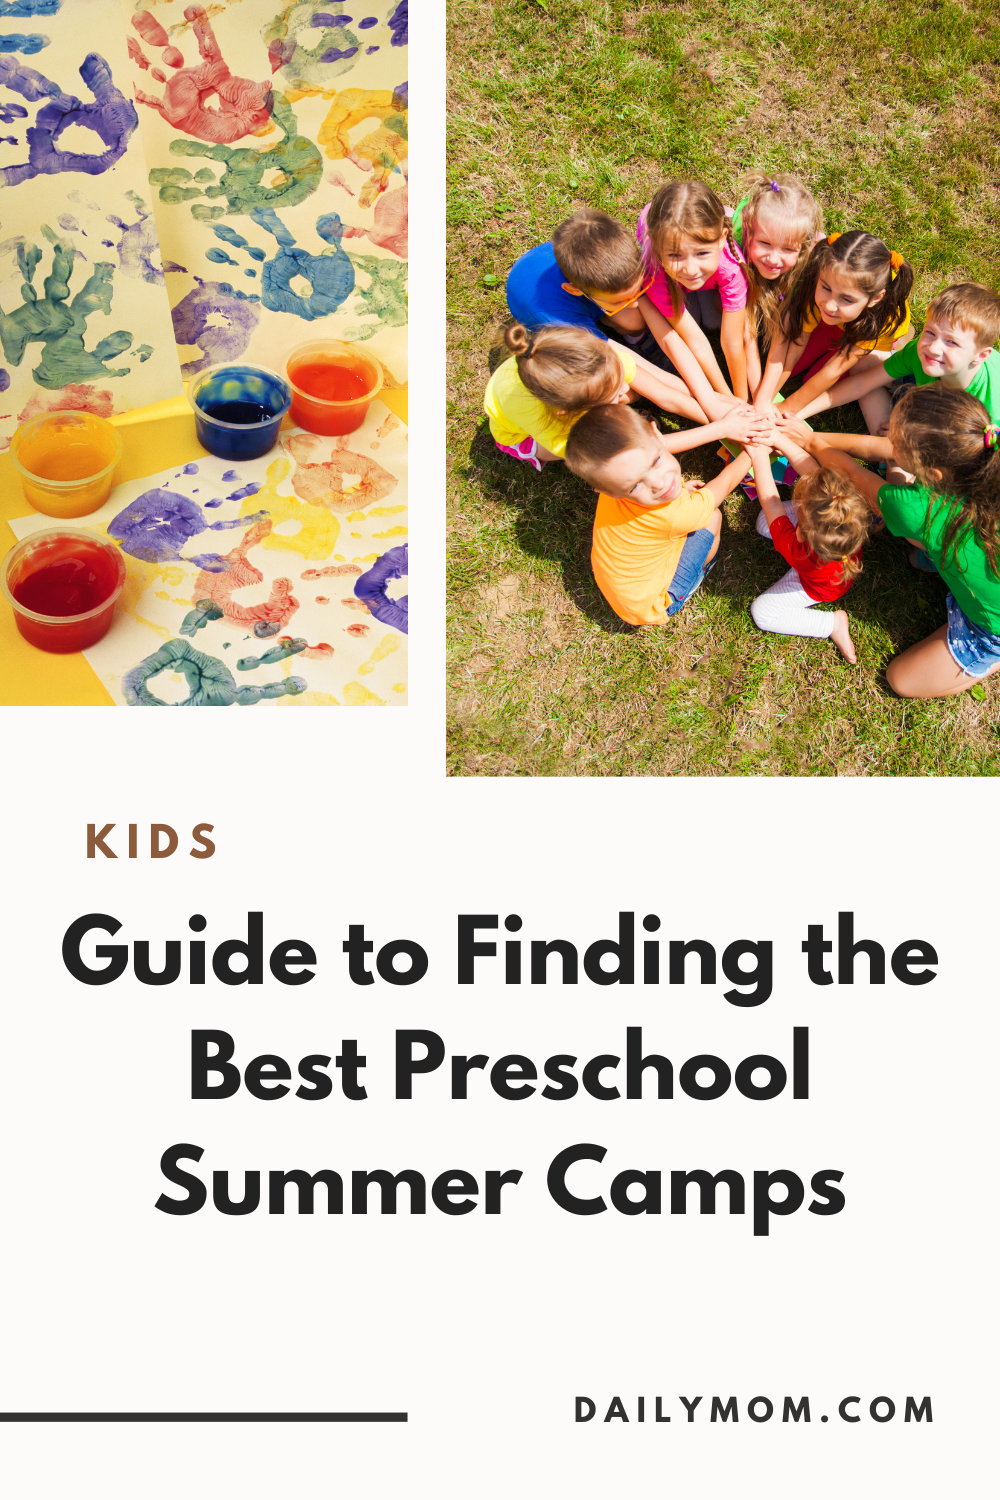 Preschool Summer Camp - How To Find Preschool Programs To Join 1 Daily Mom, Magazine For Families